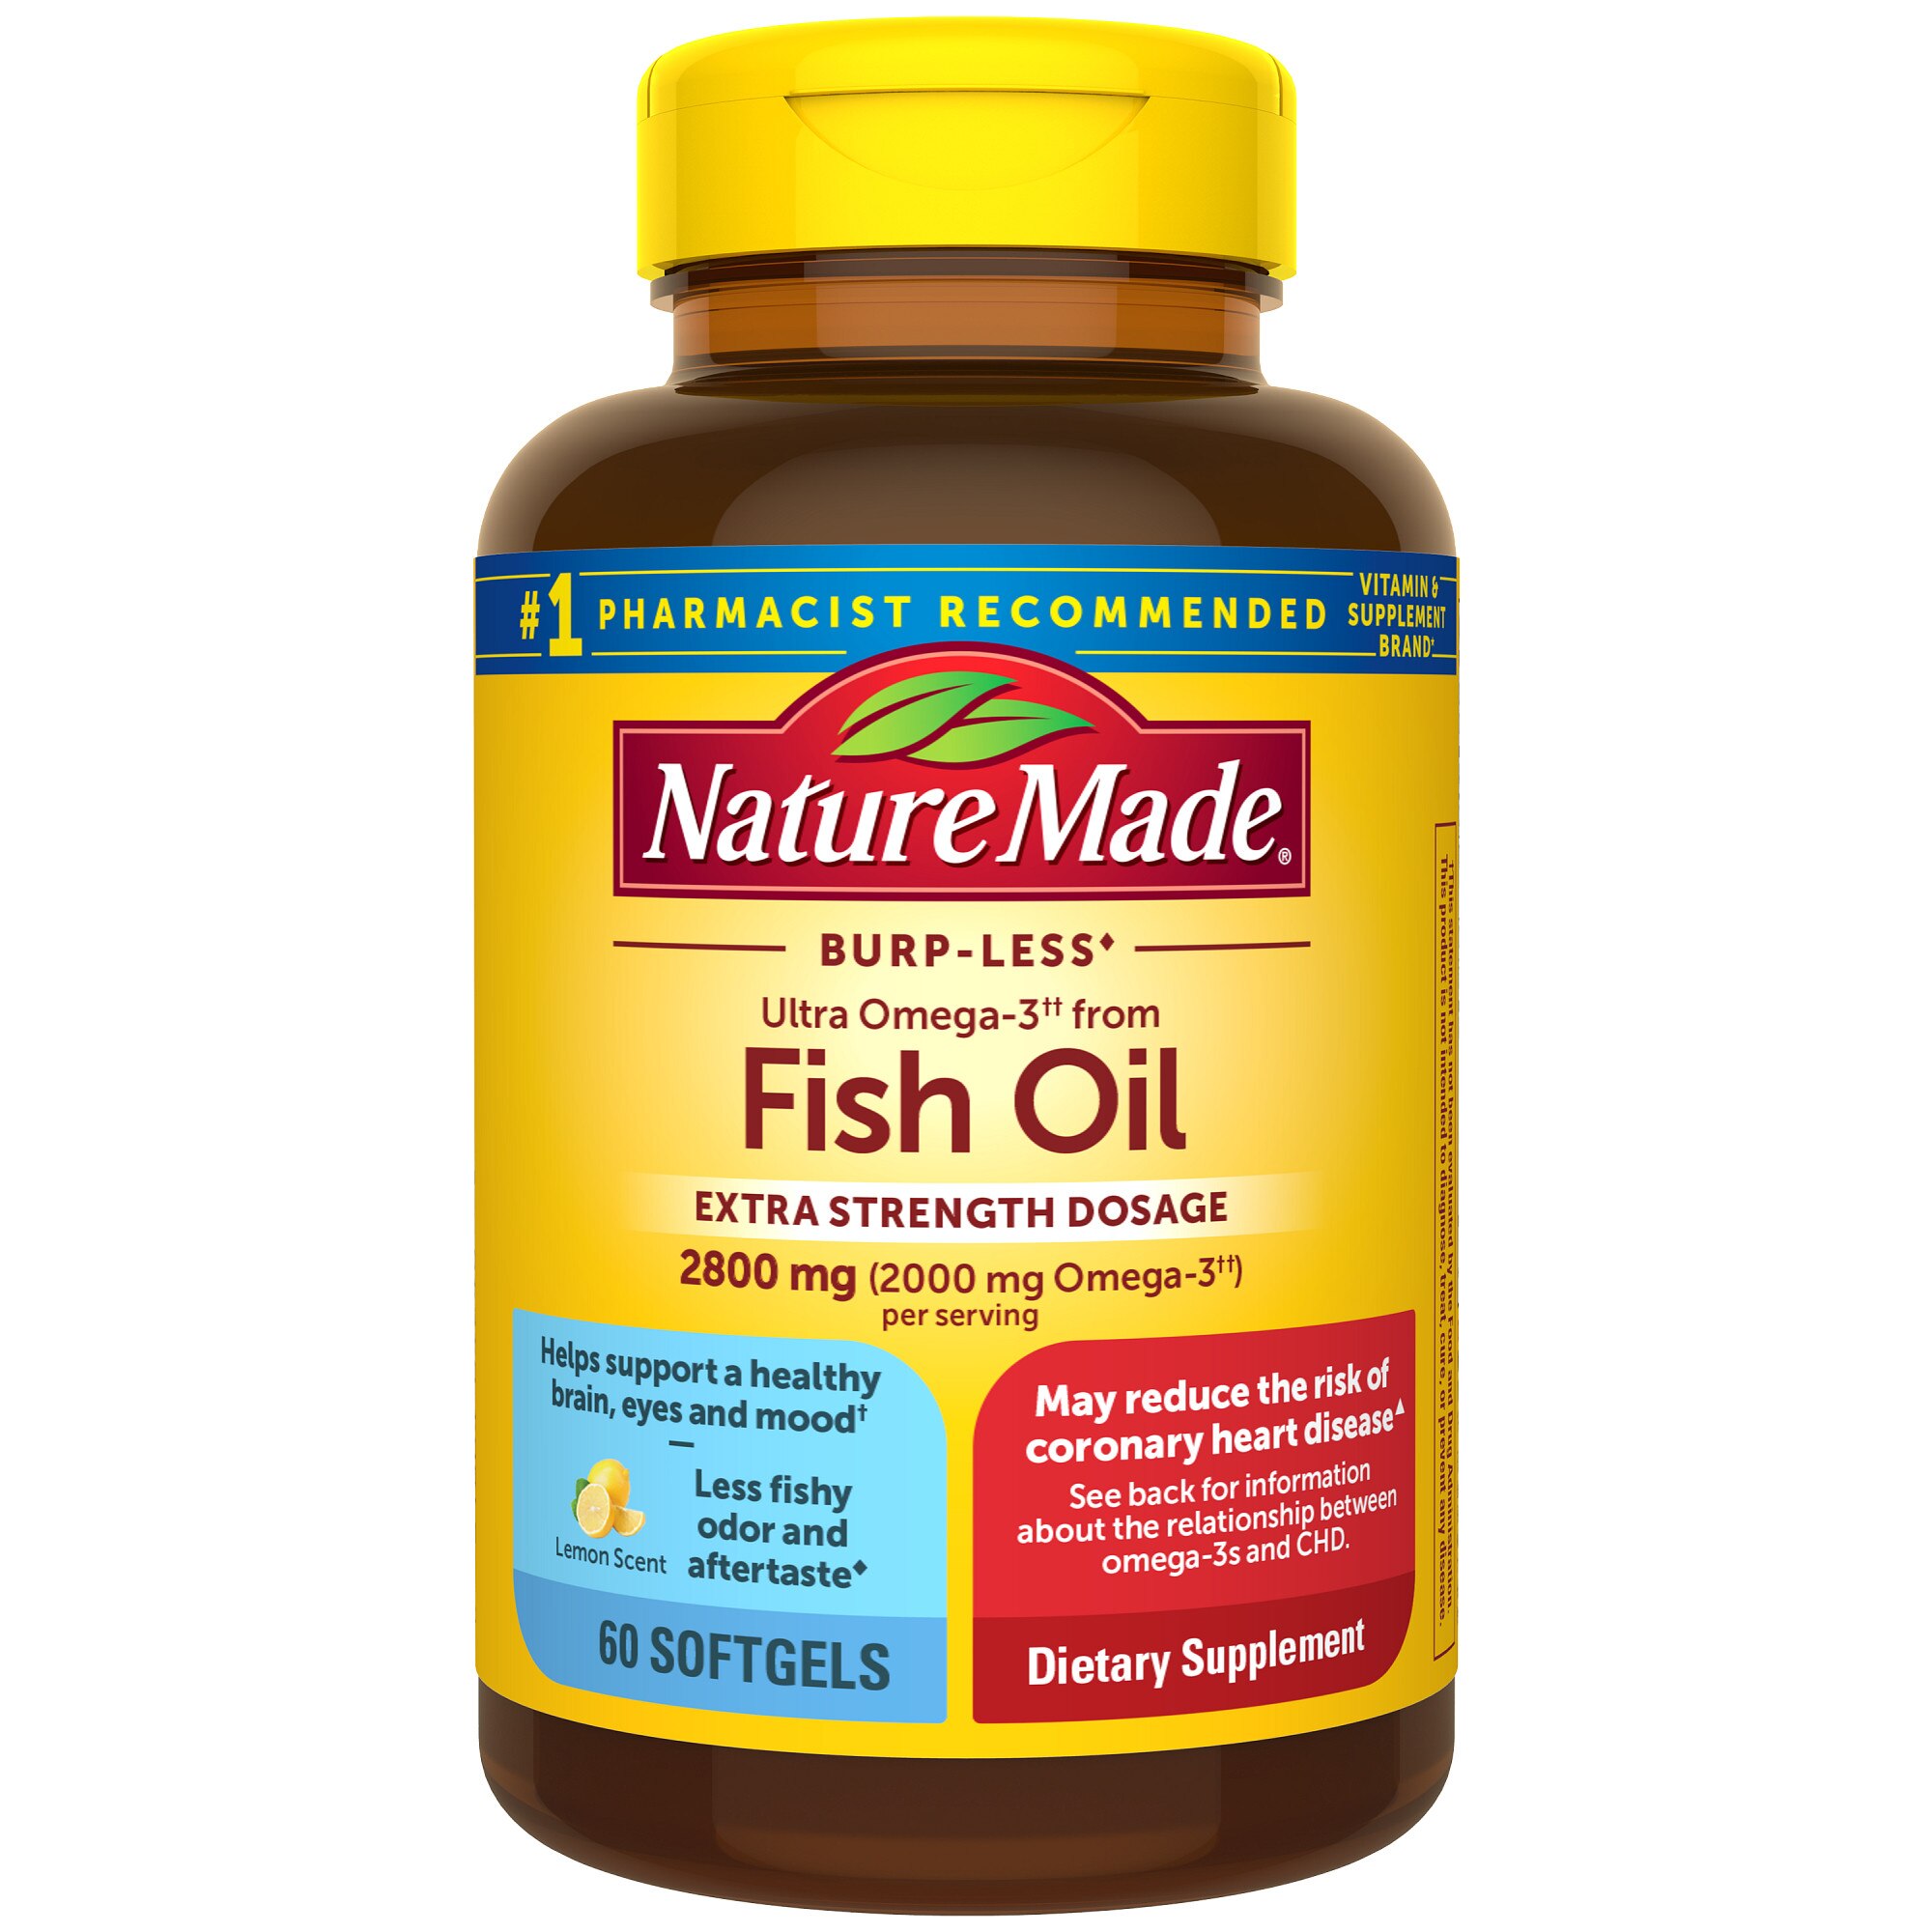 Nature Made Extra Strength Burp-Less Omega 3 Fish Oil 2800 mg, 60 CT